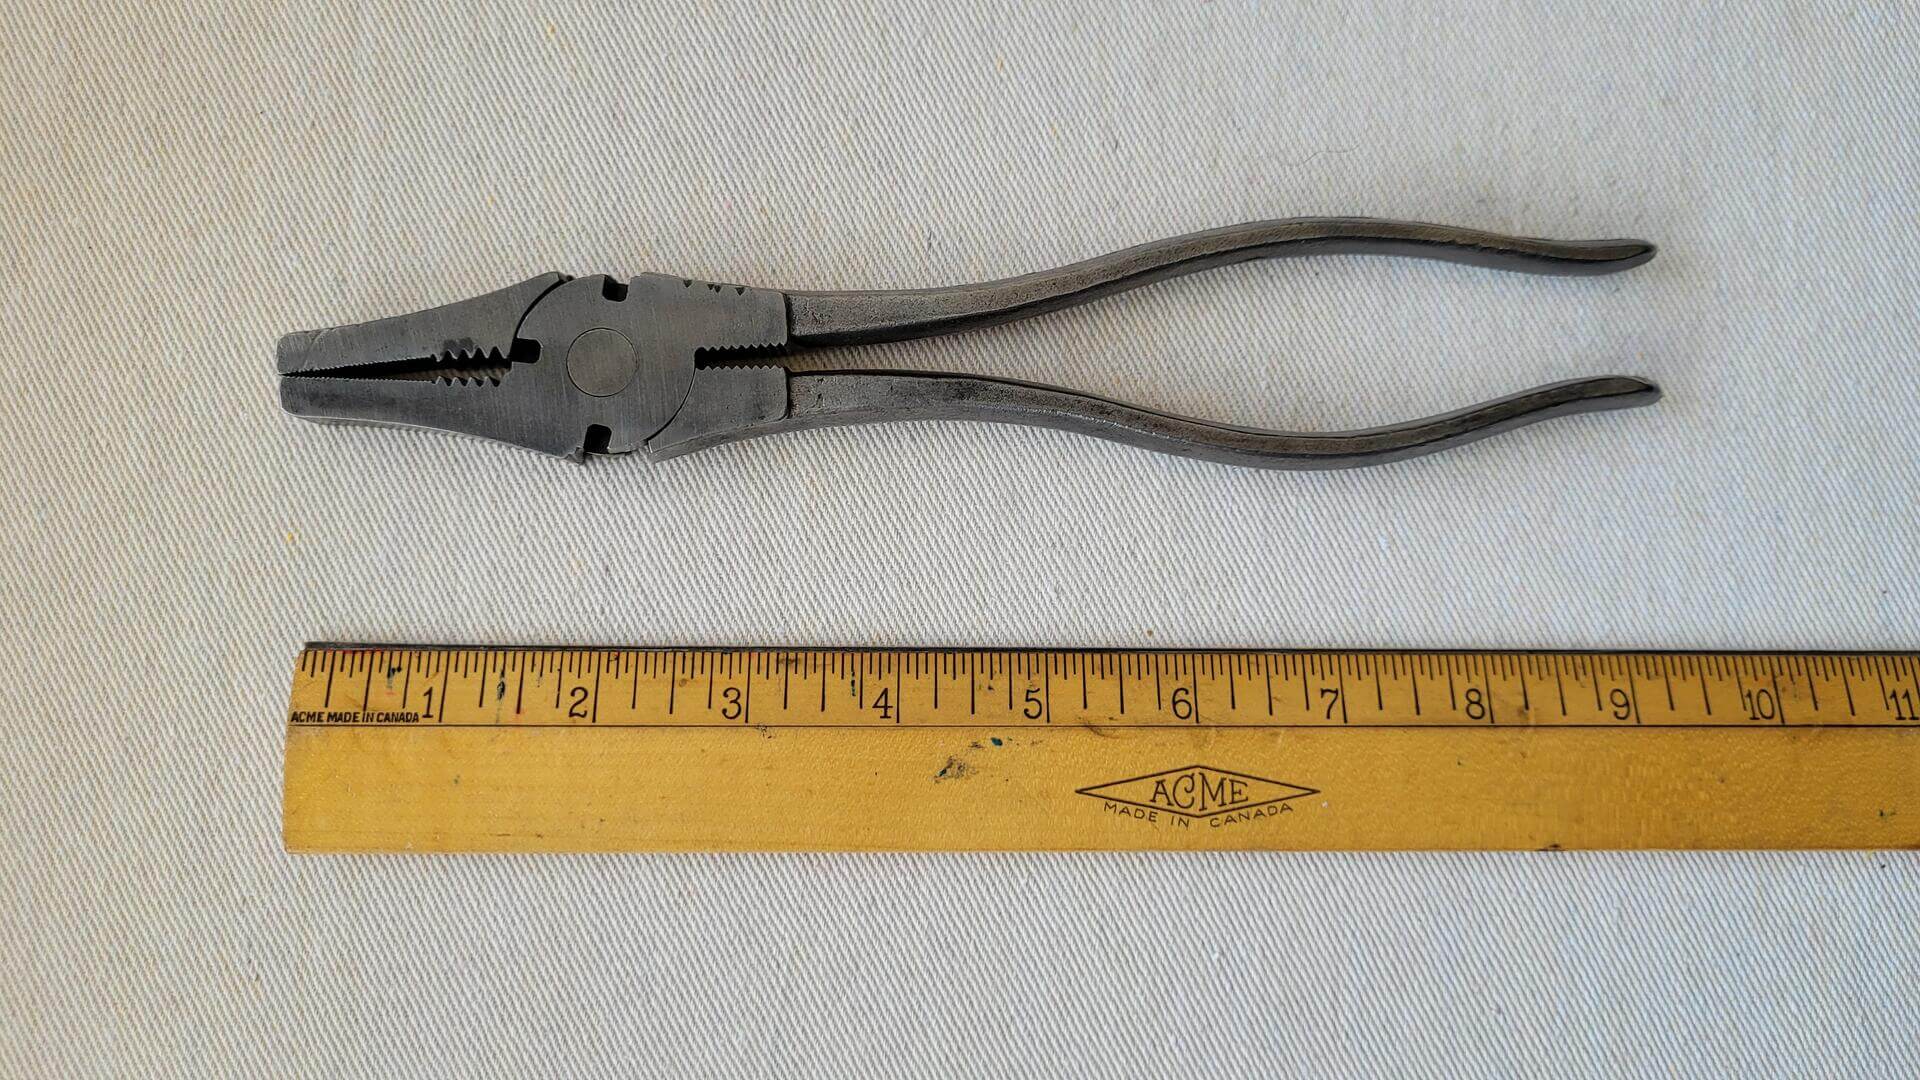 Vintage fence wire cutters and pliers 9 1/2 inches with the bottom set of gripping teeth. Vintage made in USA collectible fencing farm and lineman gripping hand tools